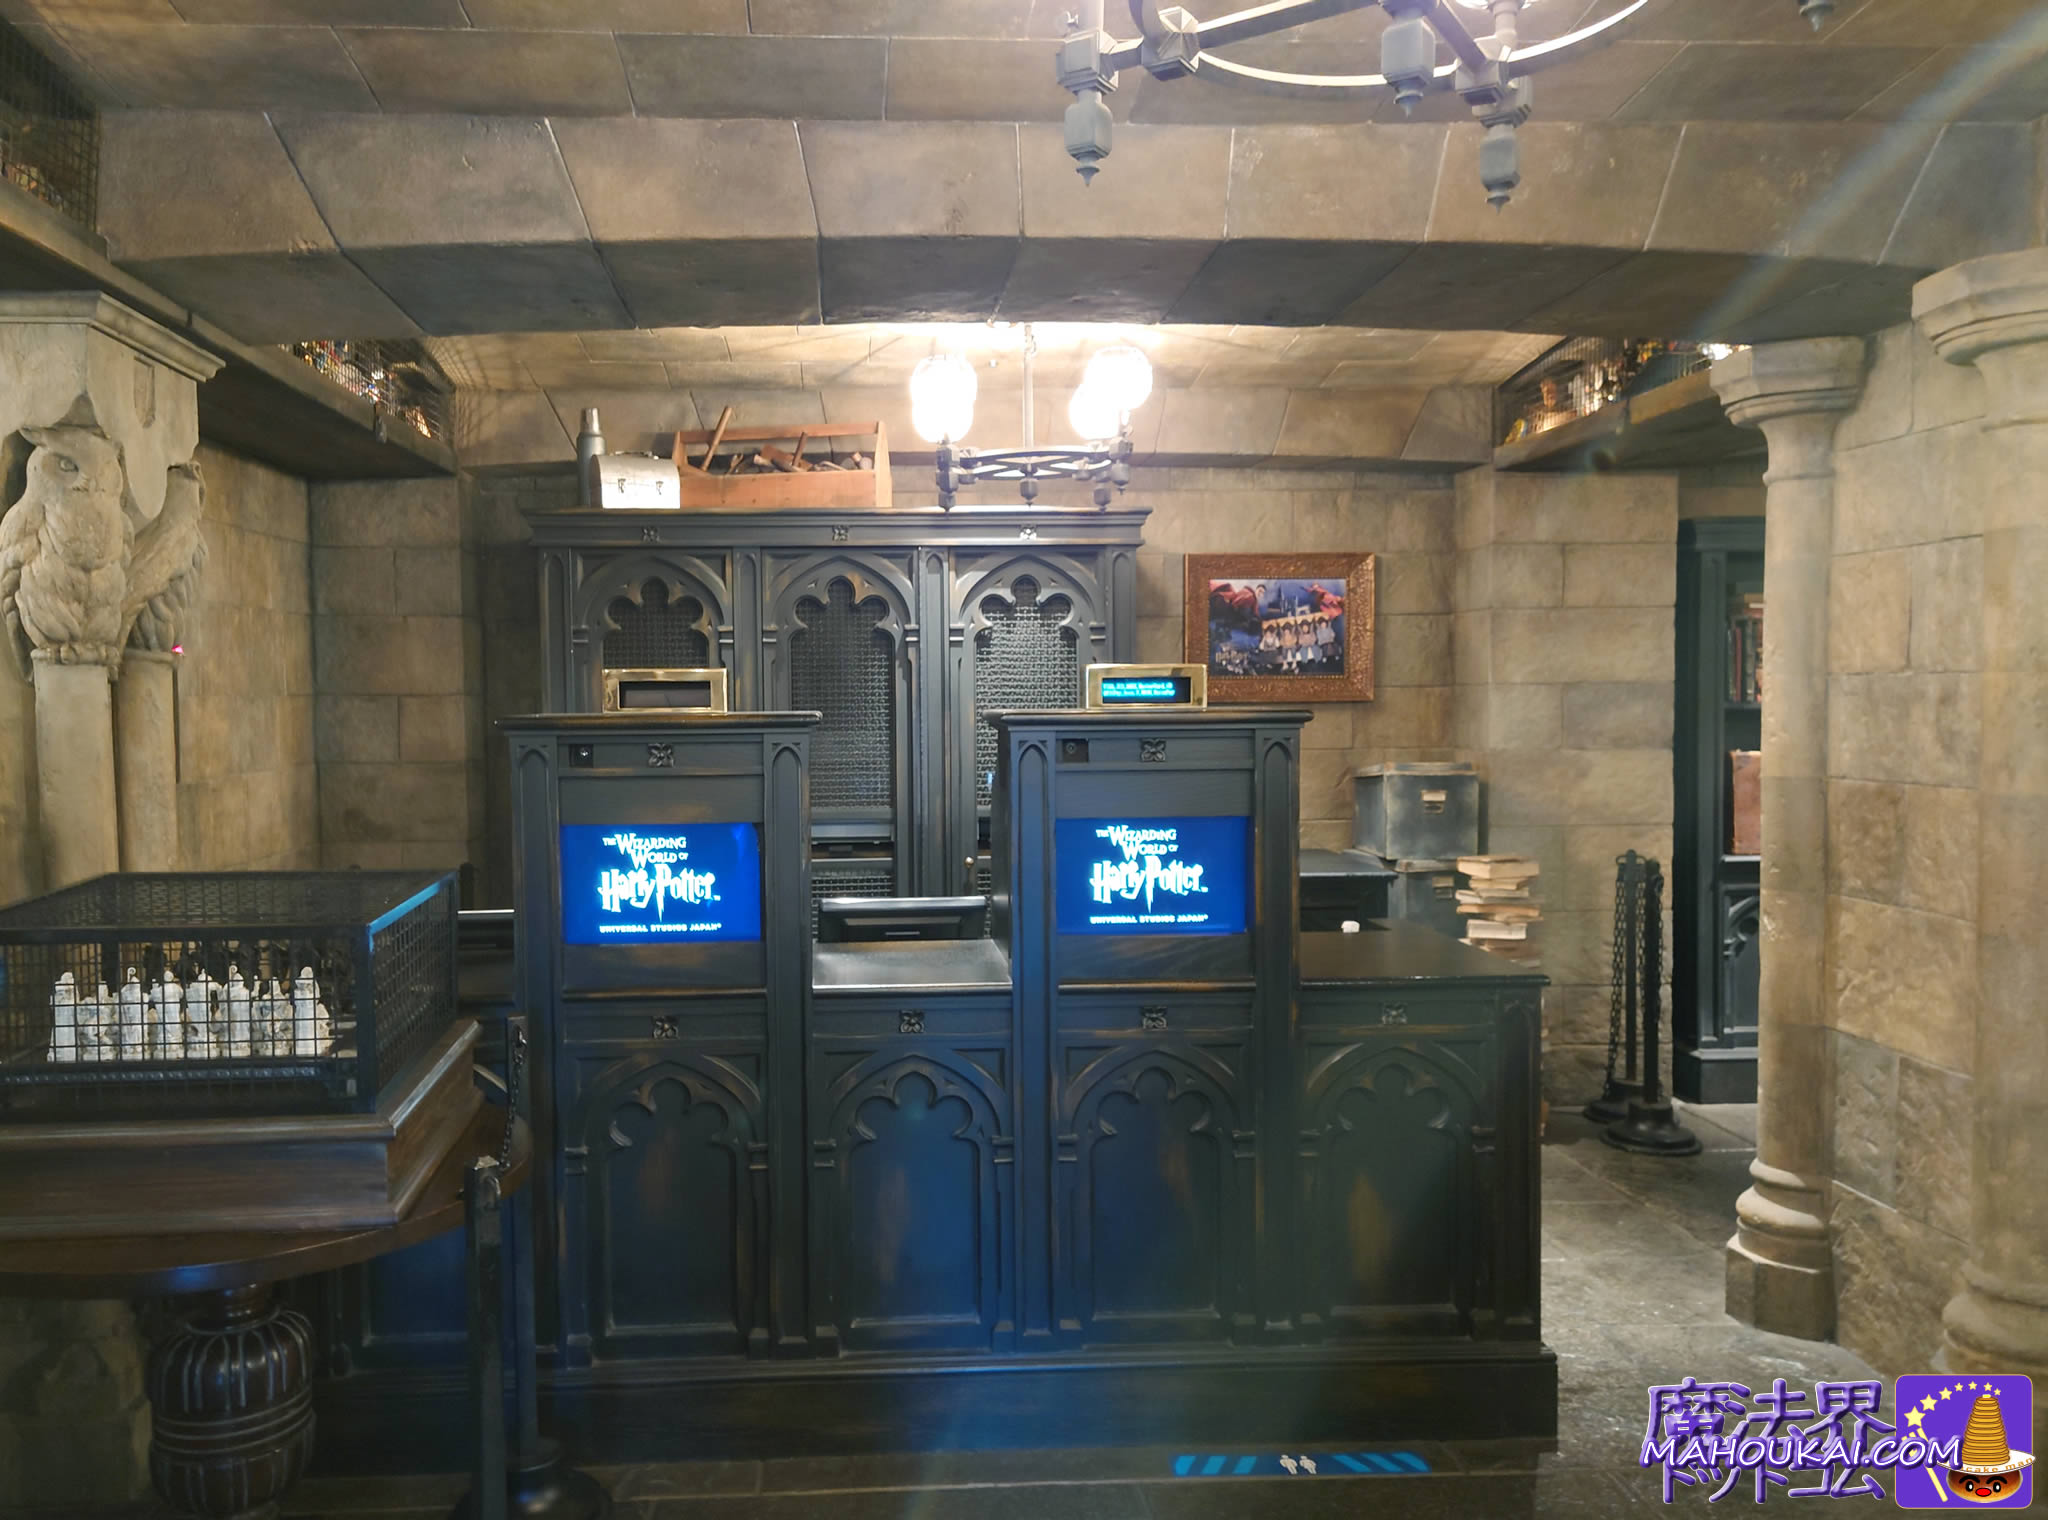 Harry Potter Ride photo op at Filch's Confiscated Goods Store, USJ 'Harry Potter Area'.